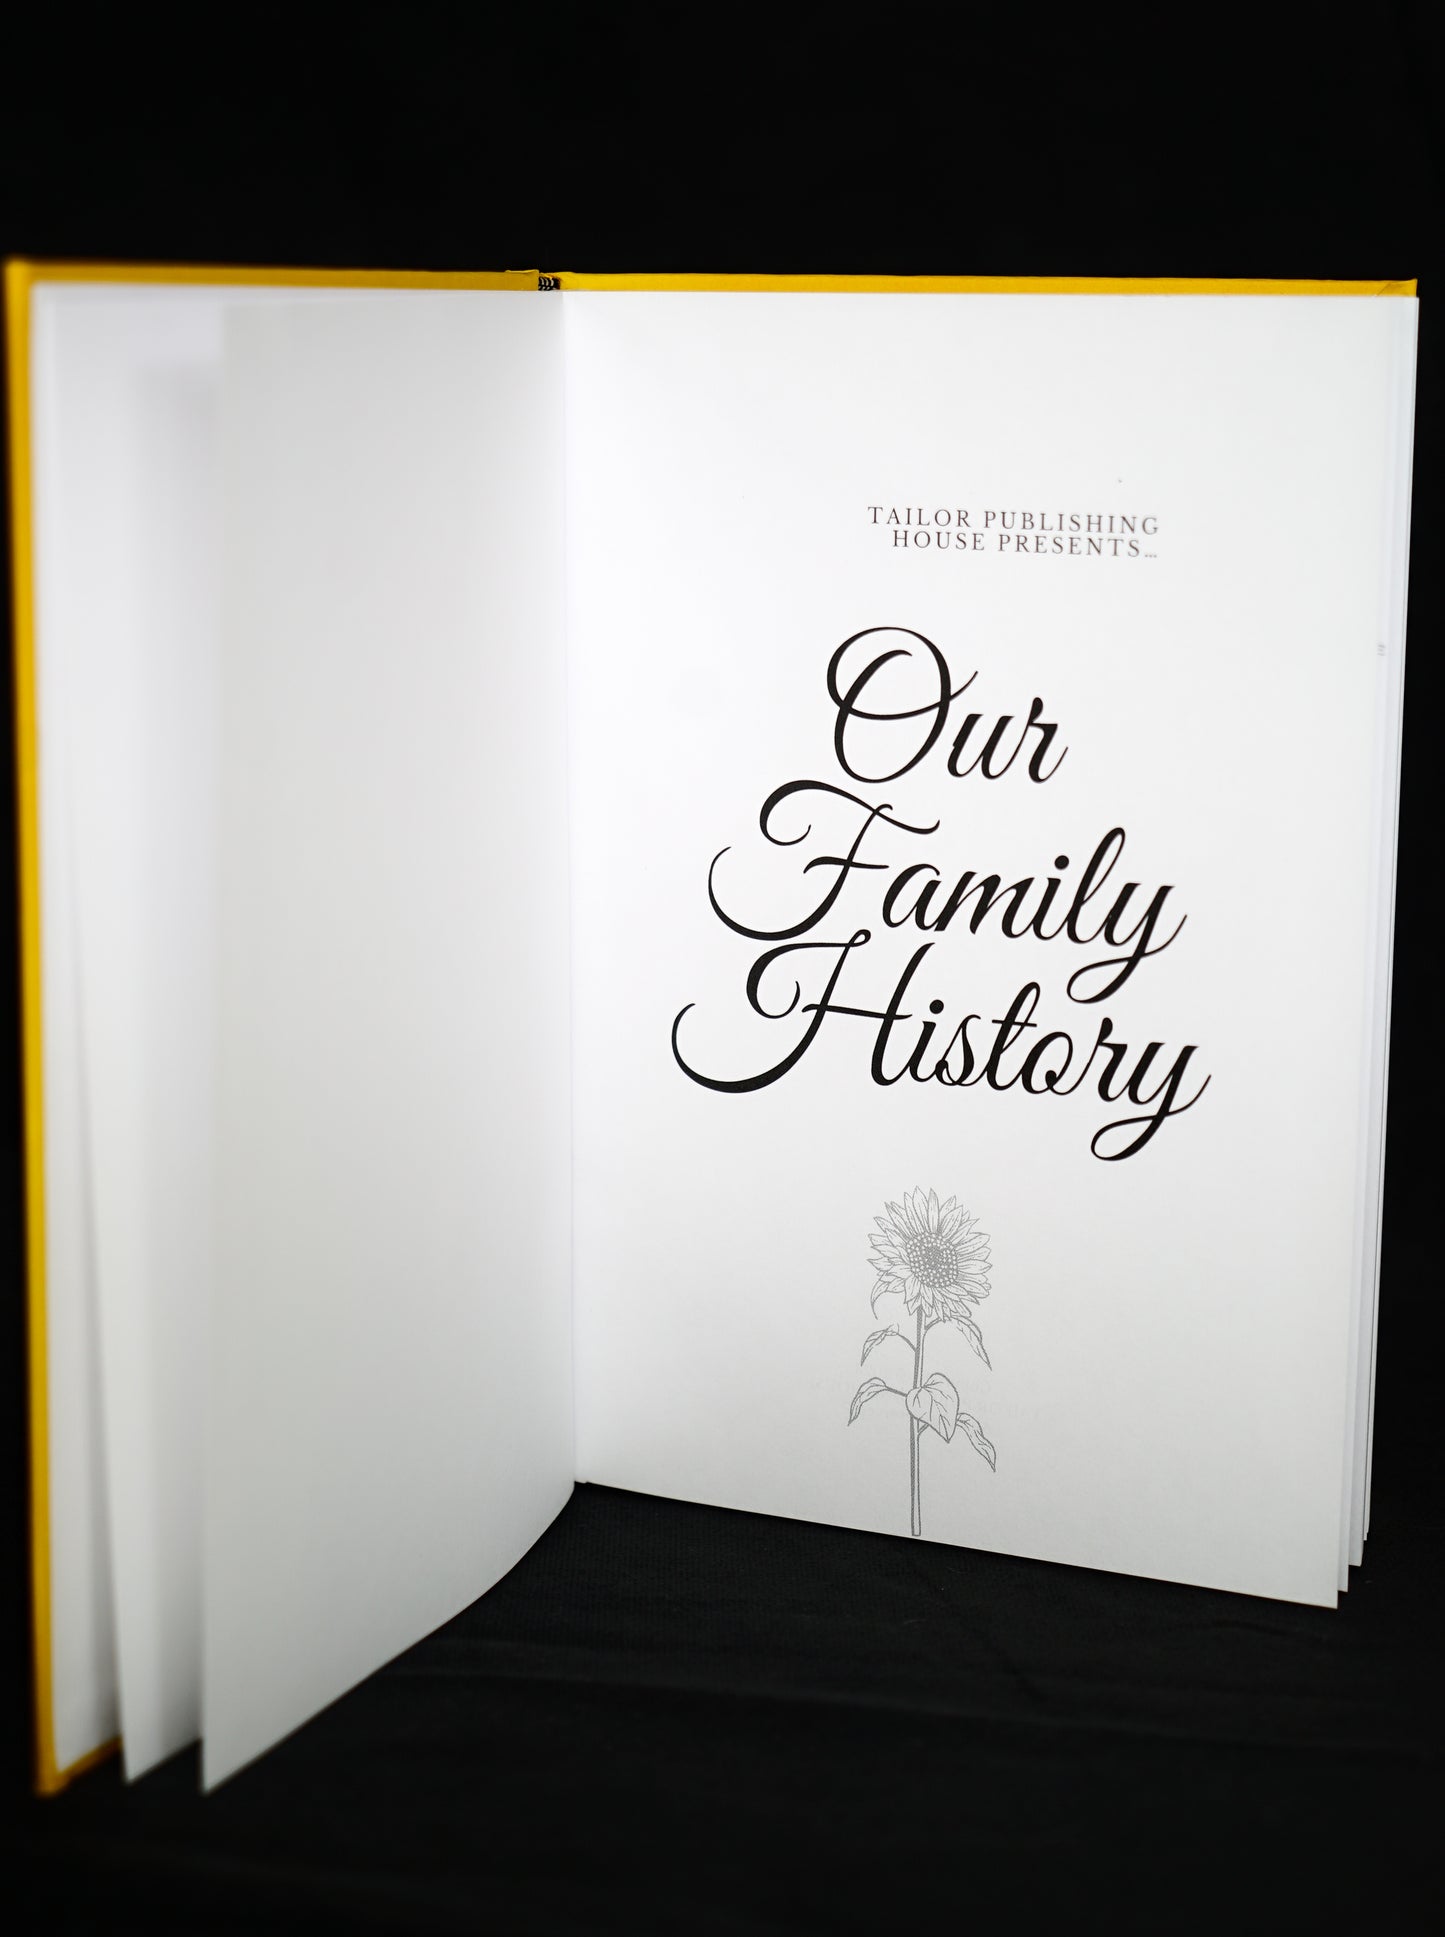 Our Family History